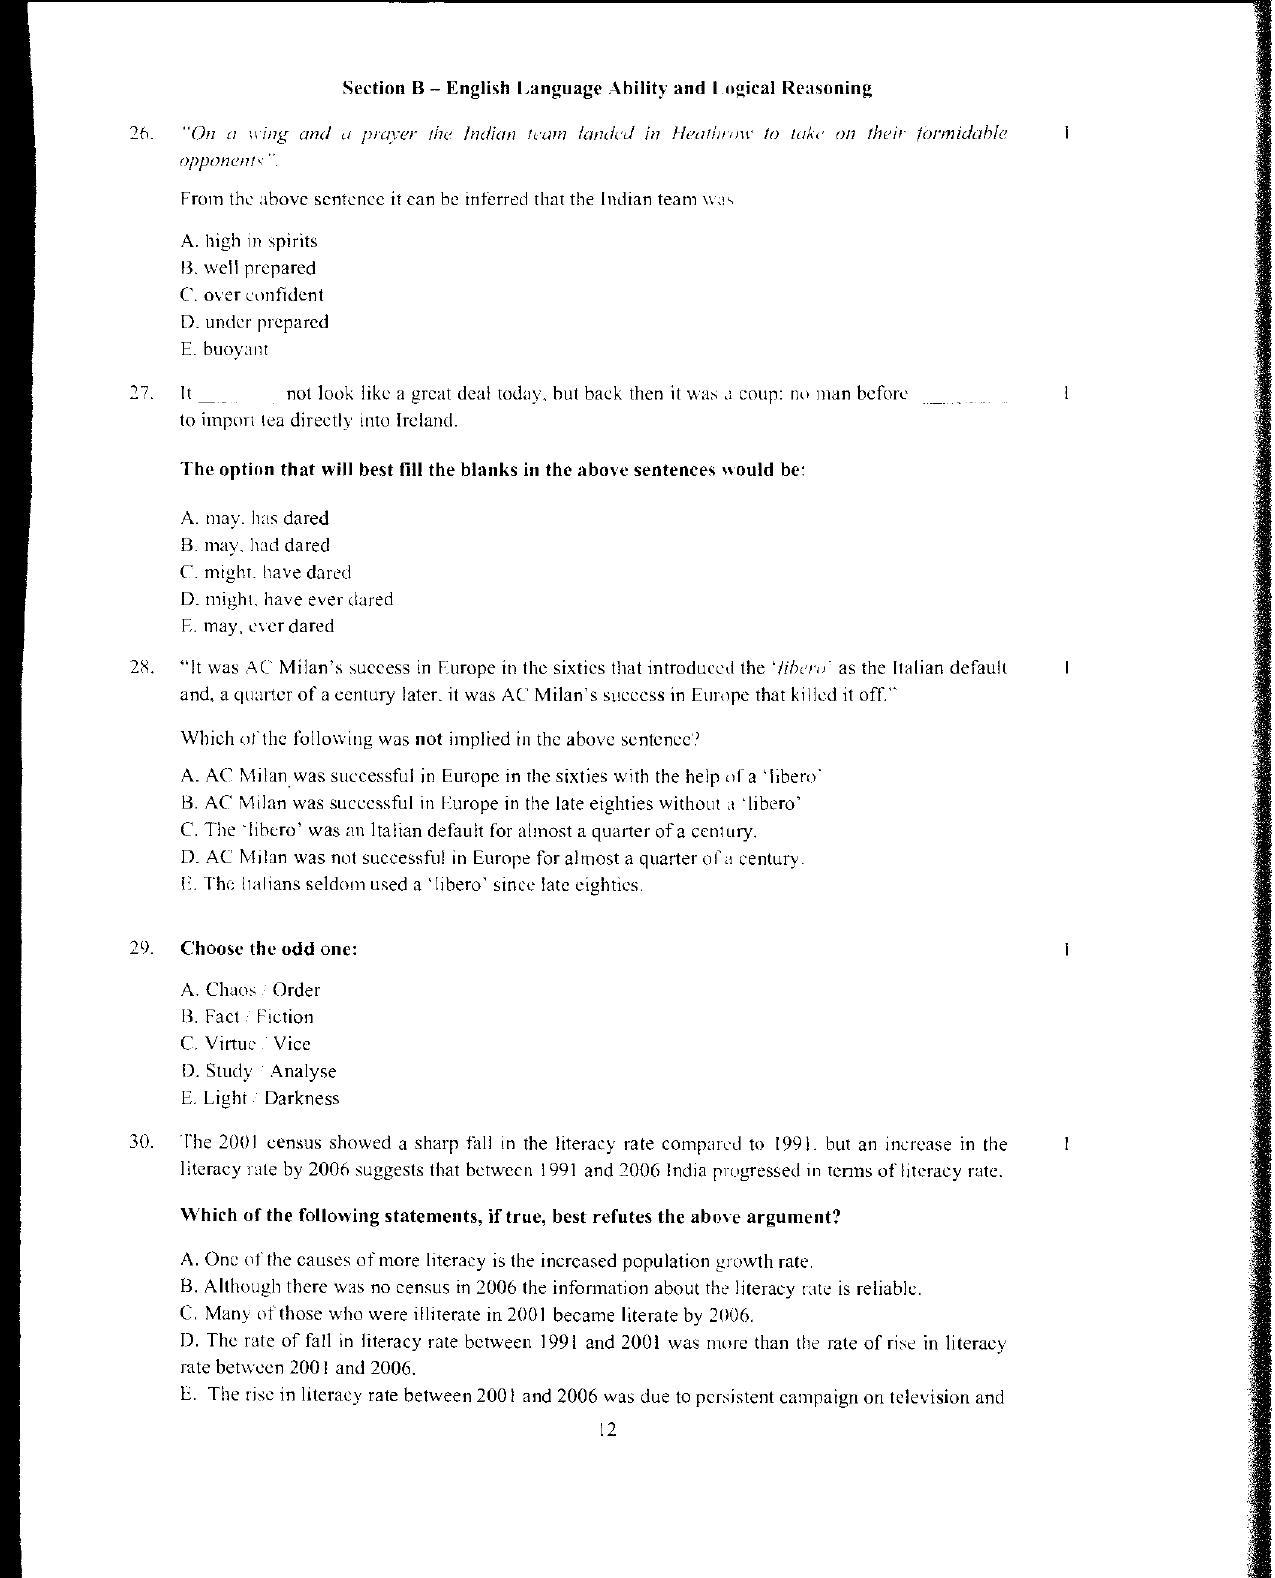 XAT 2012 Question Papers - Page 13